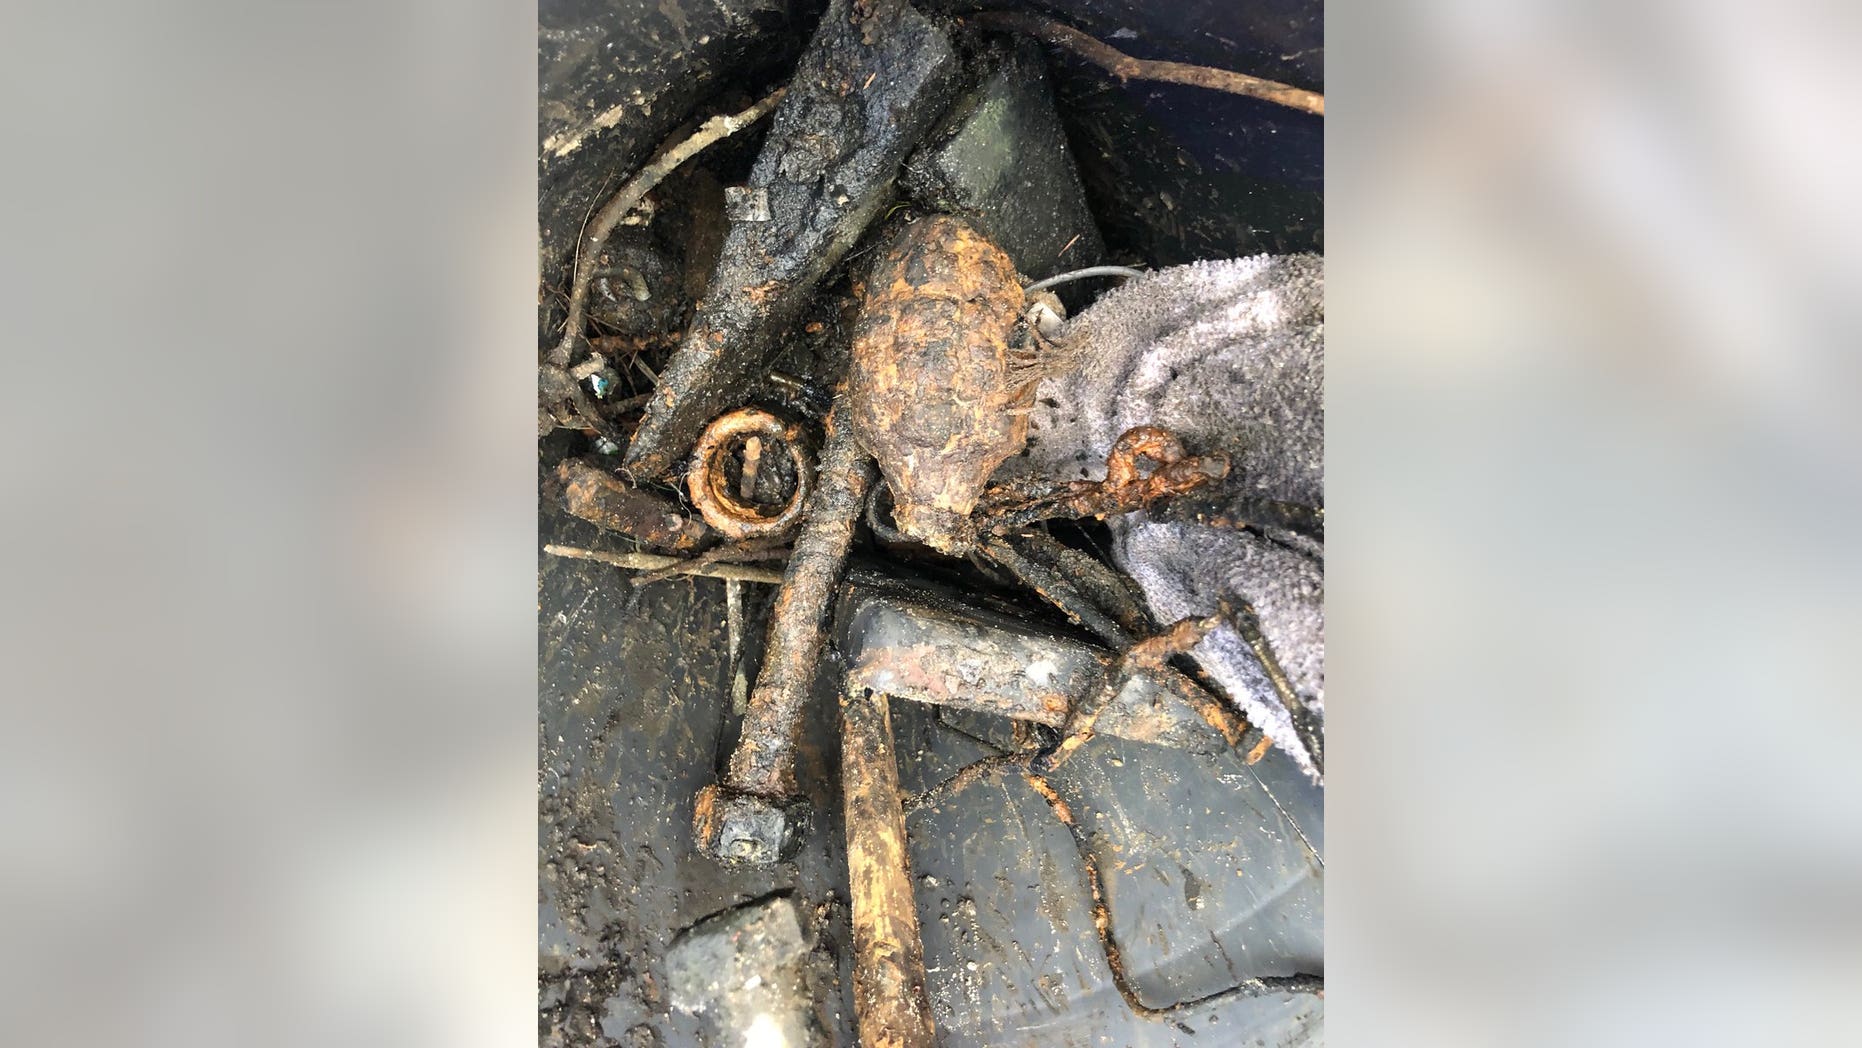 Man finds ‘authentic WWII hand grenade’ while magnet fishing in Florida: police